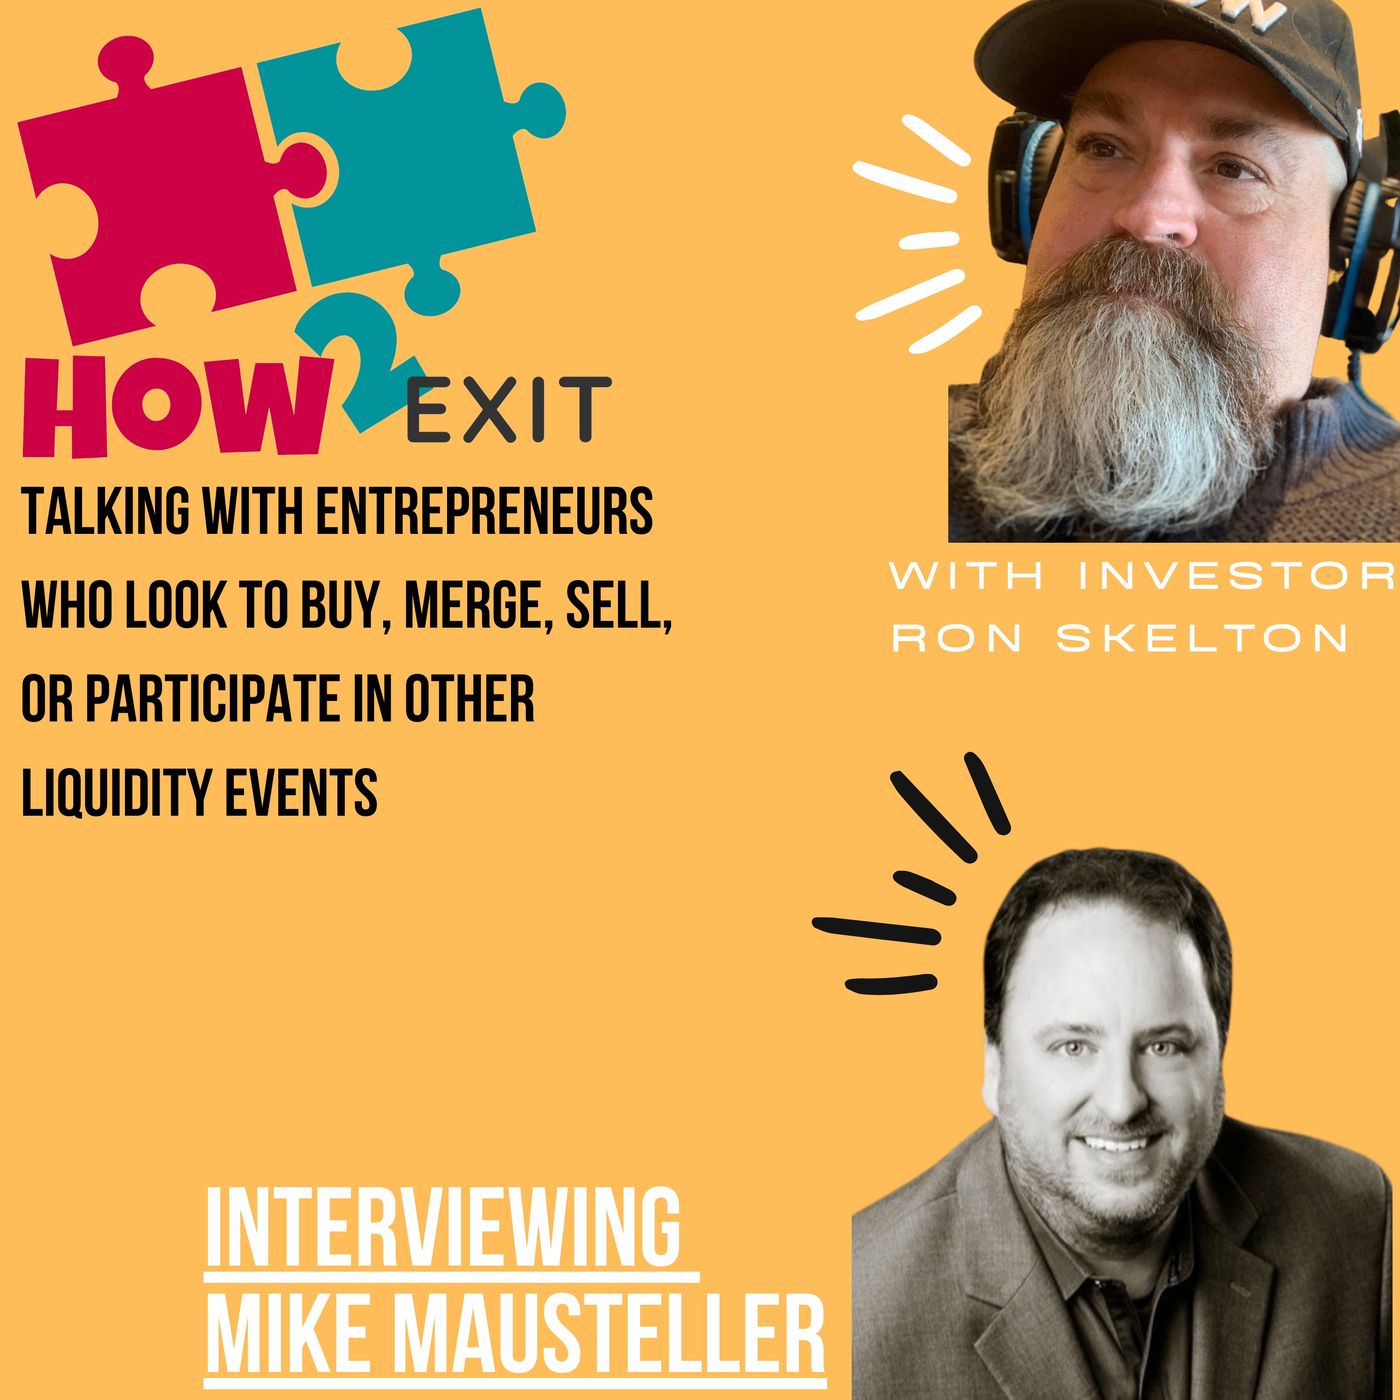 How2Exit Episode 30: Mike Mausteller - Business Coach, Executive Coach, Trainer, and Speaker. Image